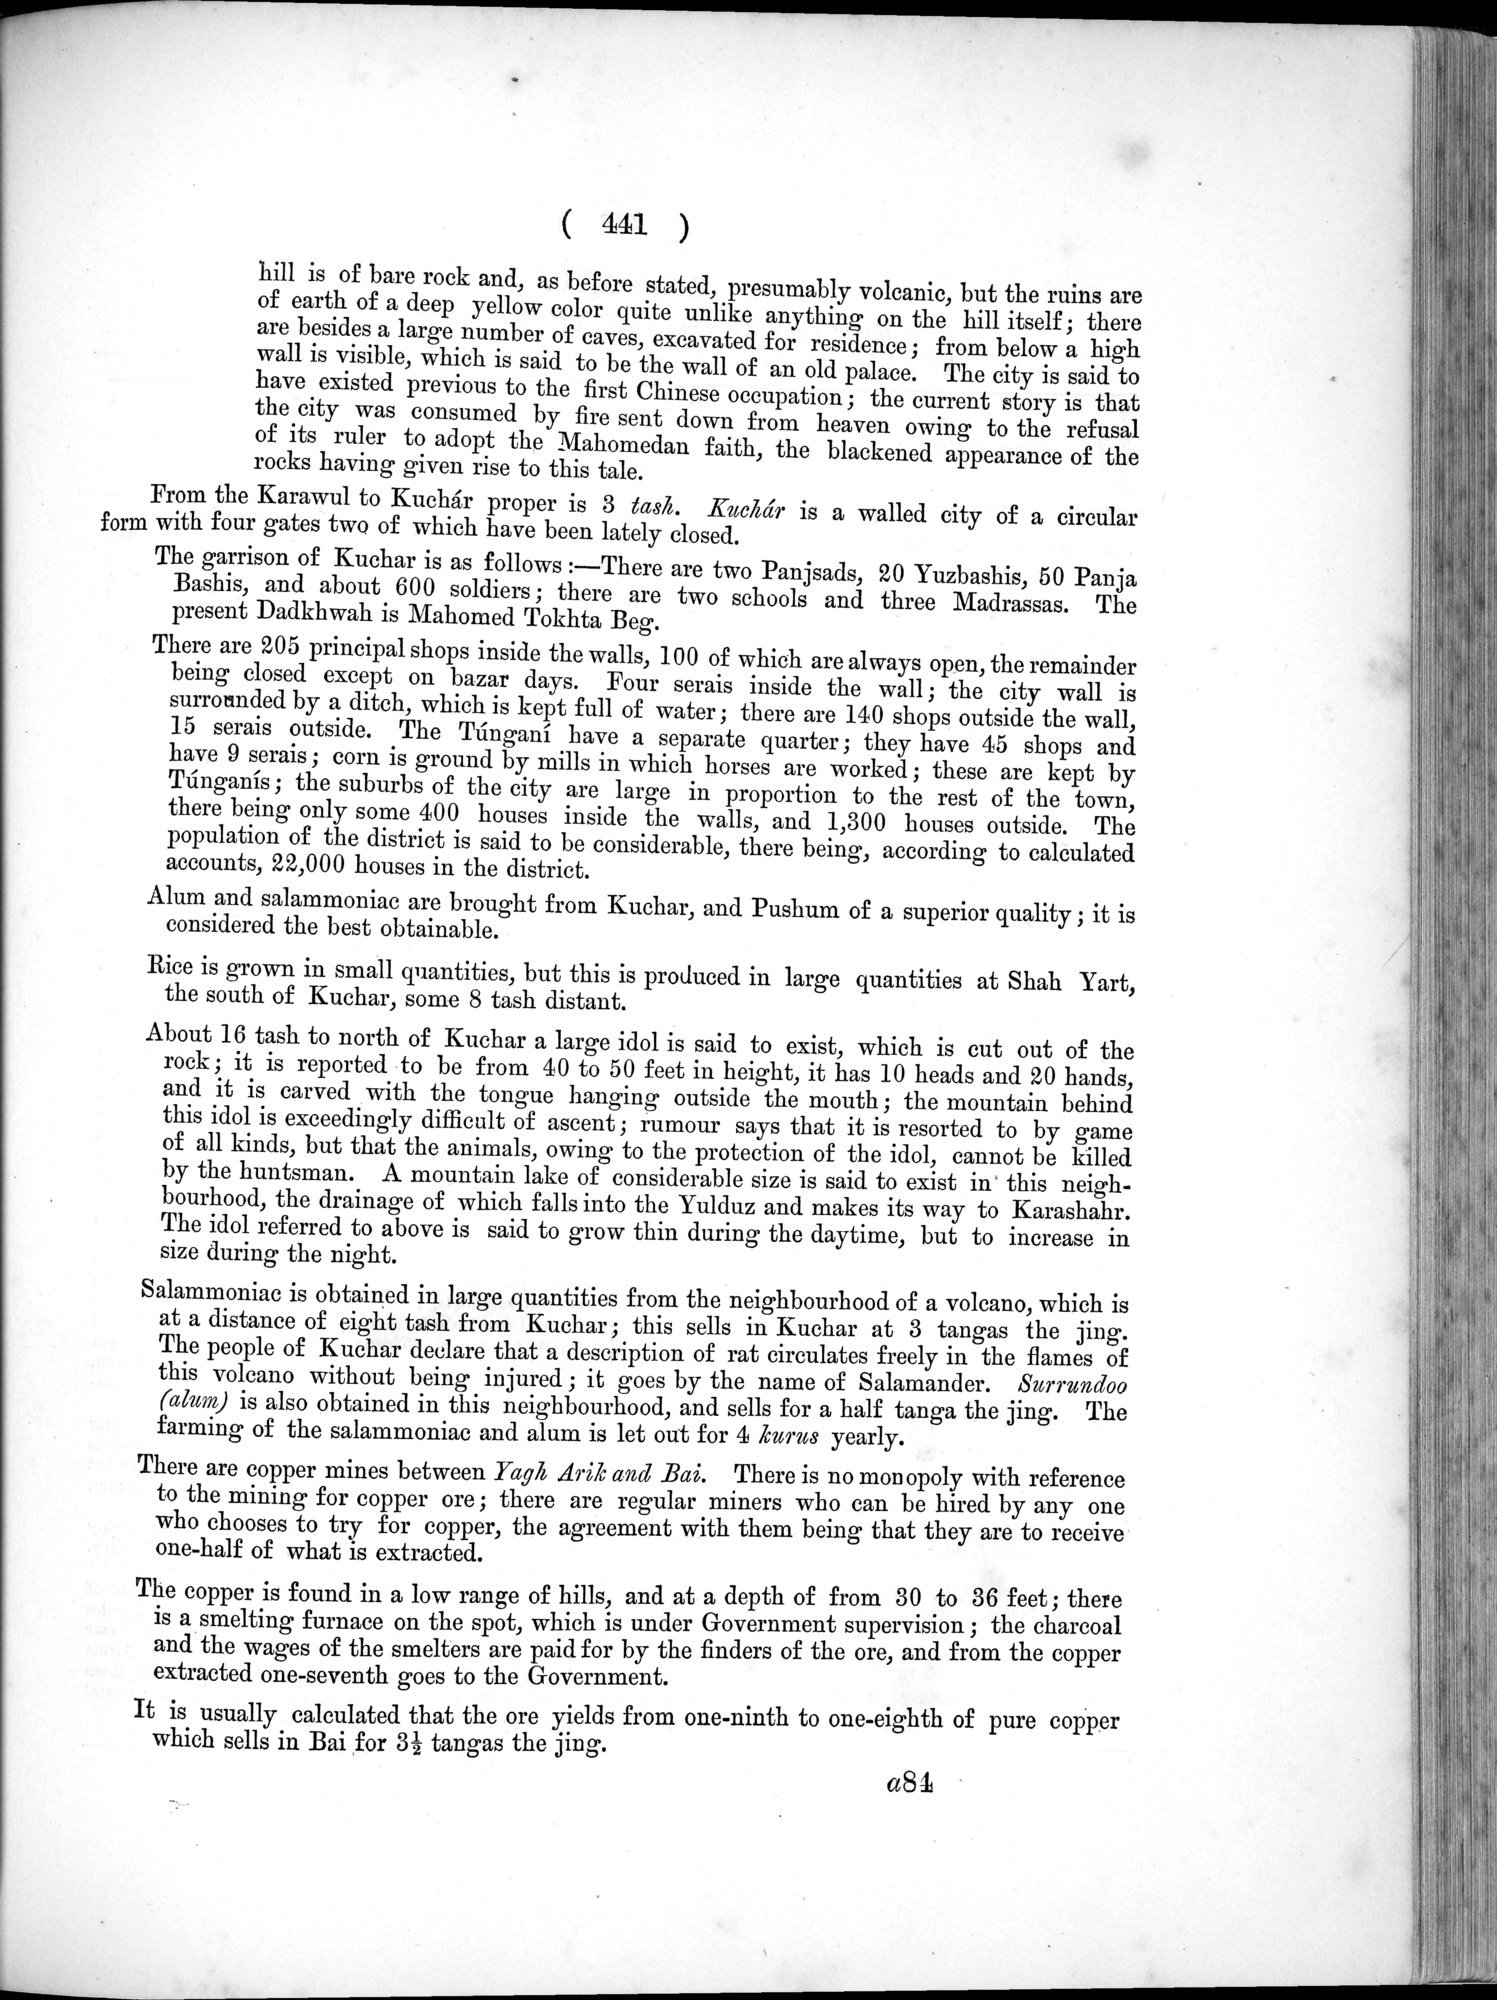 Report of a Mission to Yarkund in 1873 : vol.1 / Page 575 (Grayscale High Resolution Image)